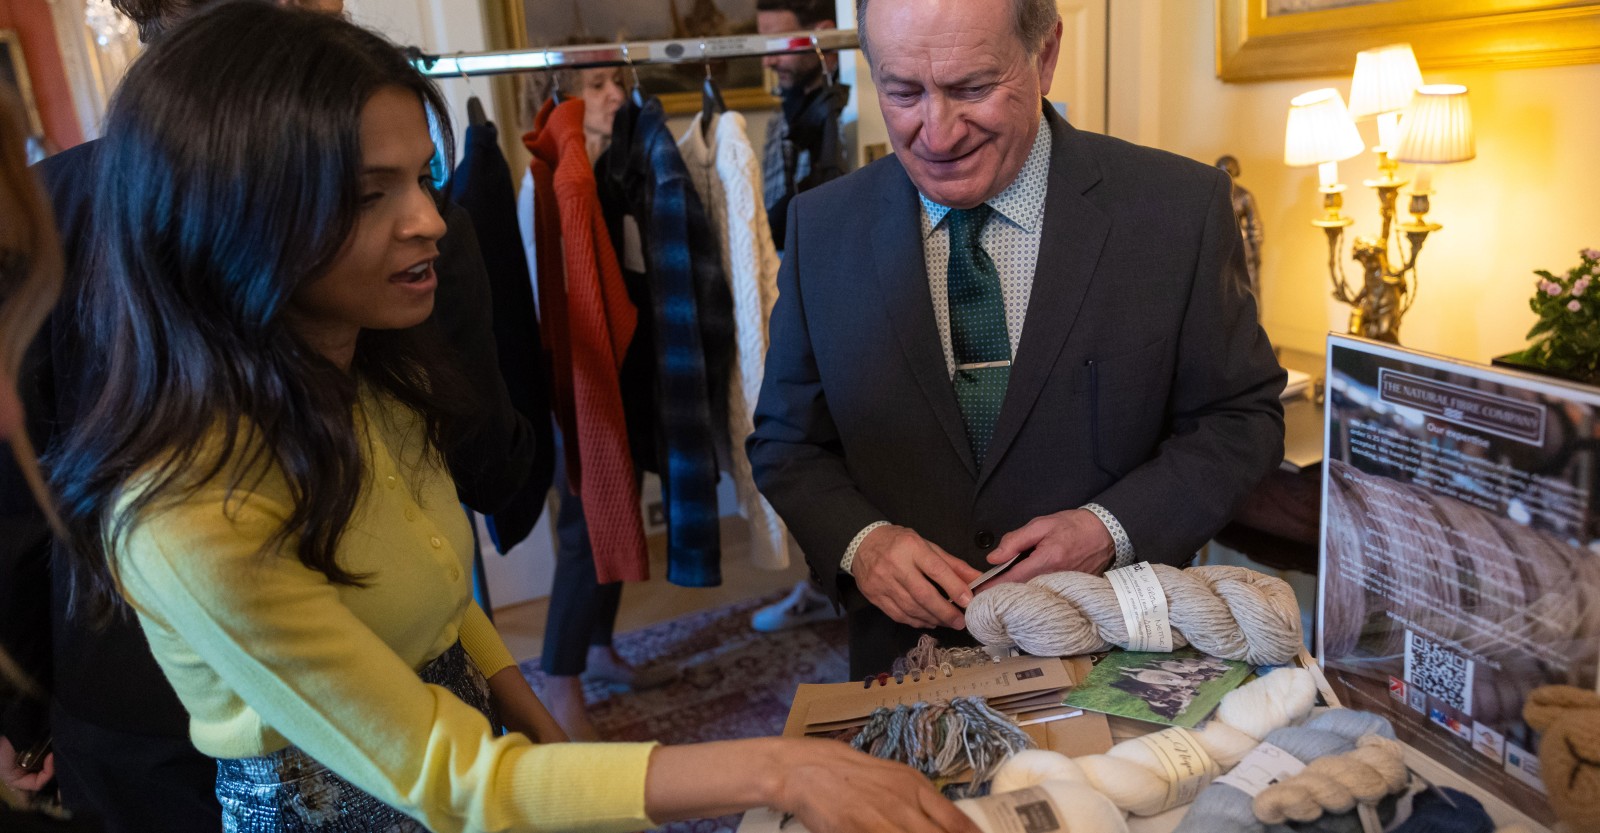 CEO of The Natural Fibre Company, Colin Spencer Halsey pictured talking to Akshata Murty, businesswoman and wife of the Prime Minister. Image credit: Simon Walker / No 10 Downing Street  